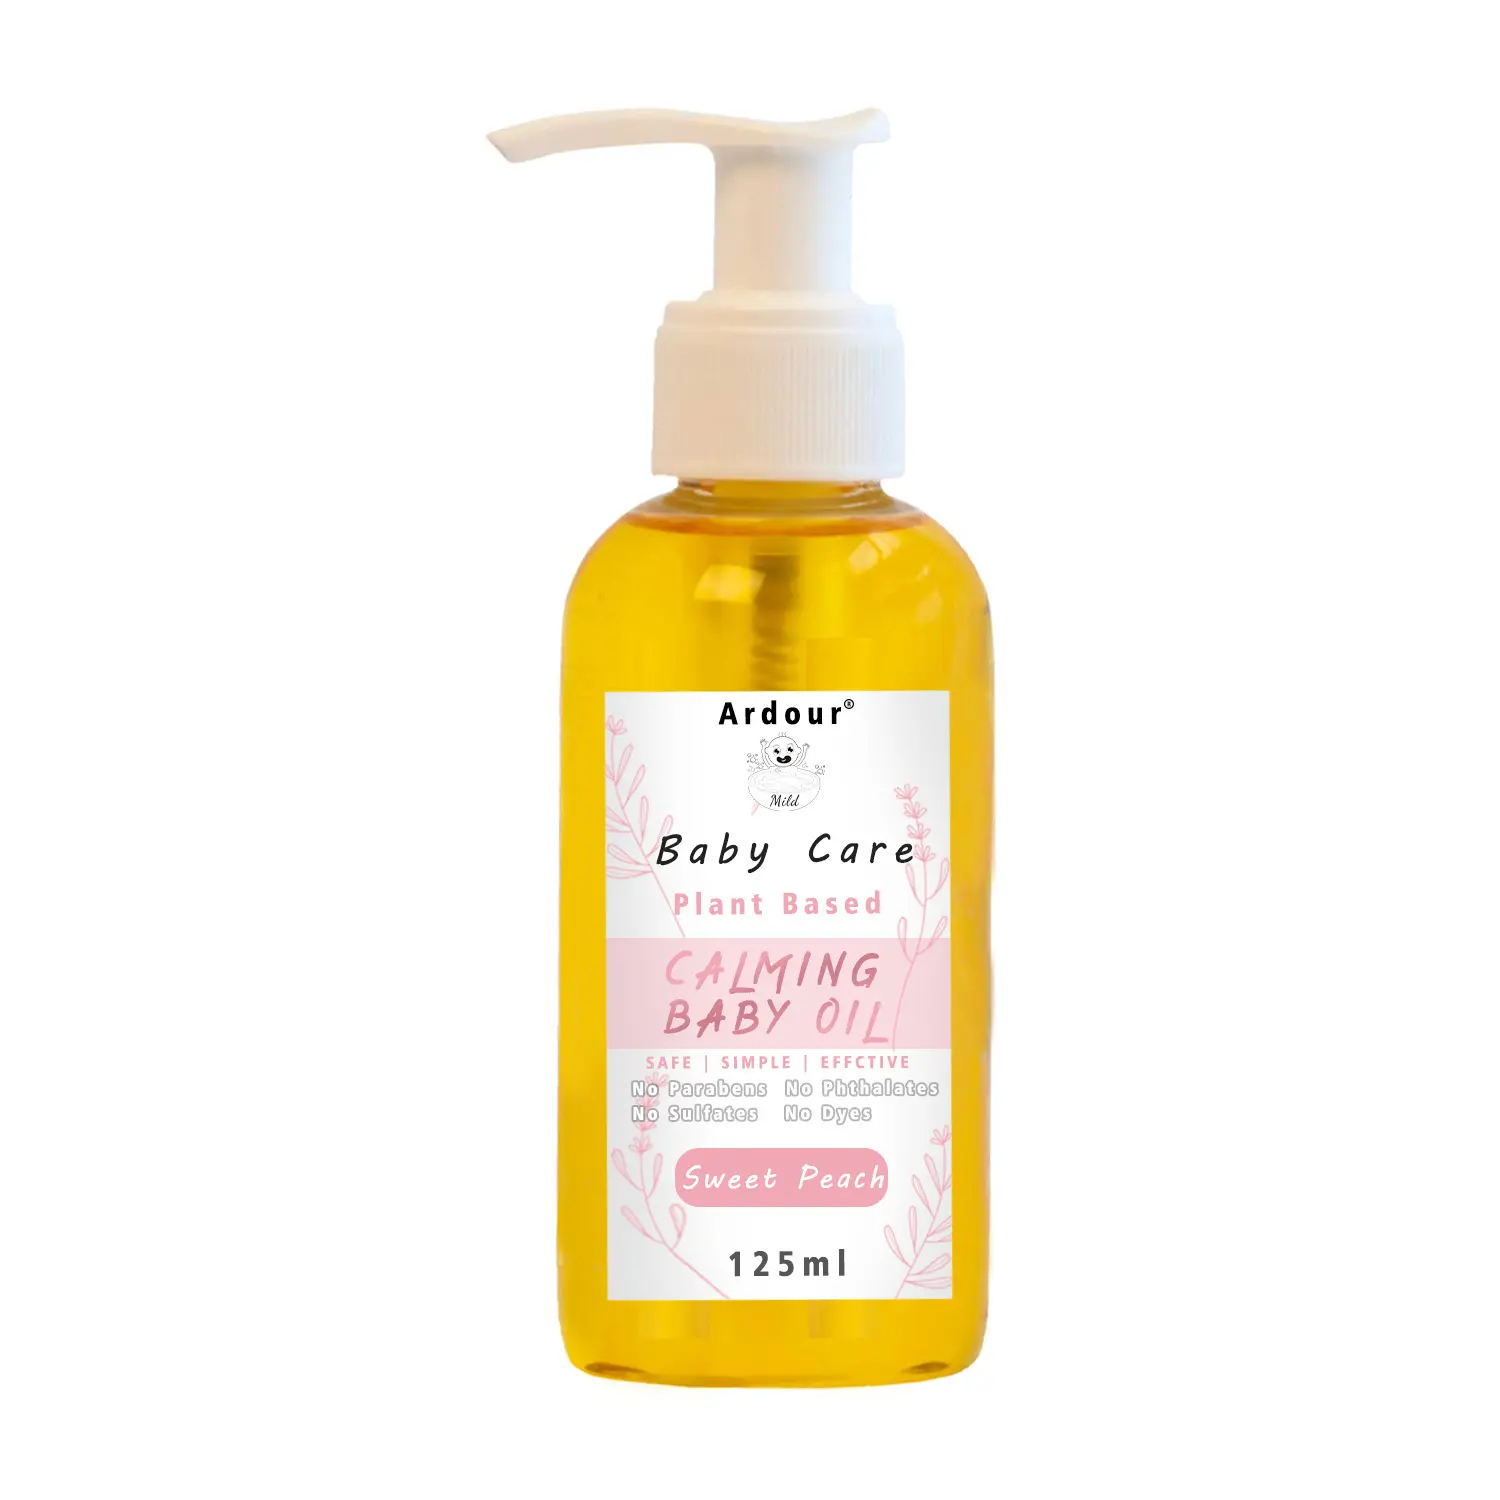 Sweet Peach Natural Organic Baby Care Products Baby Oil For Newborn Skin Hair and Body Moisturizing Nourishing Smoothing